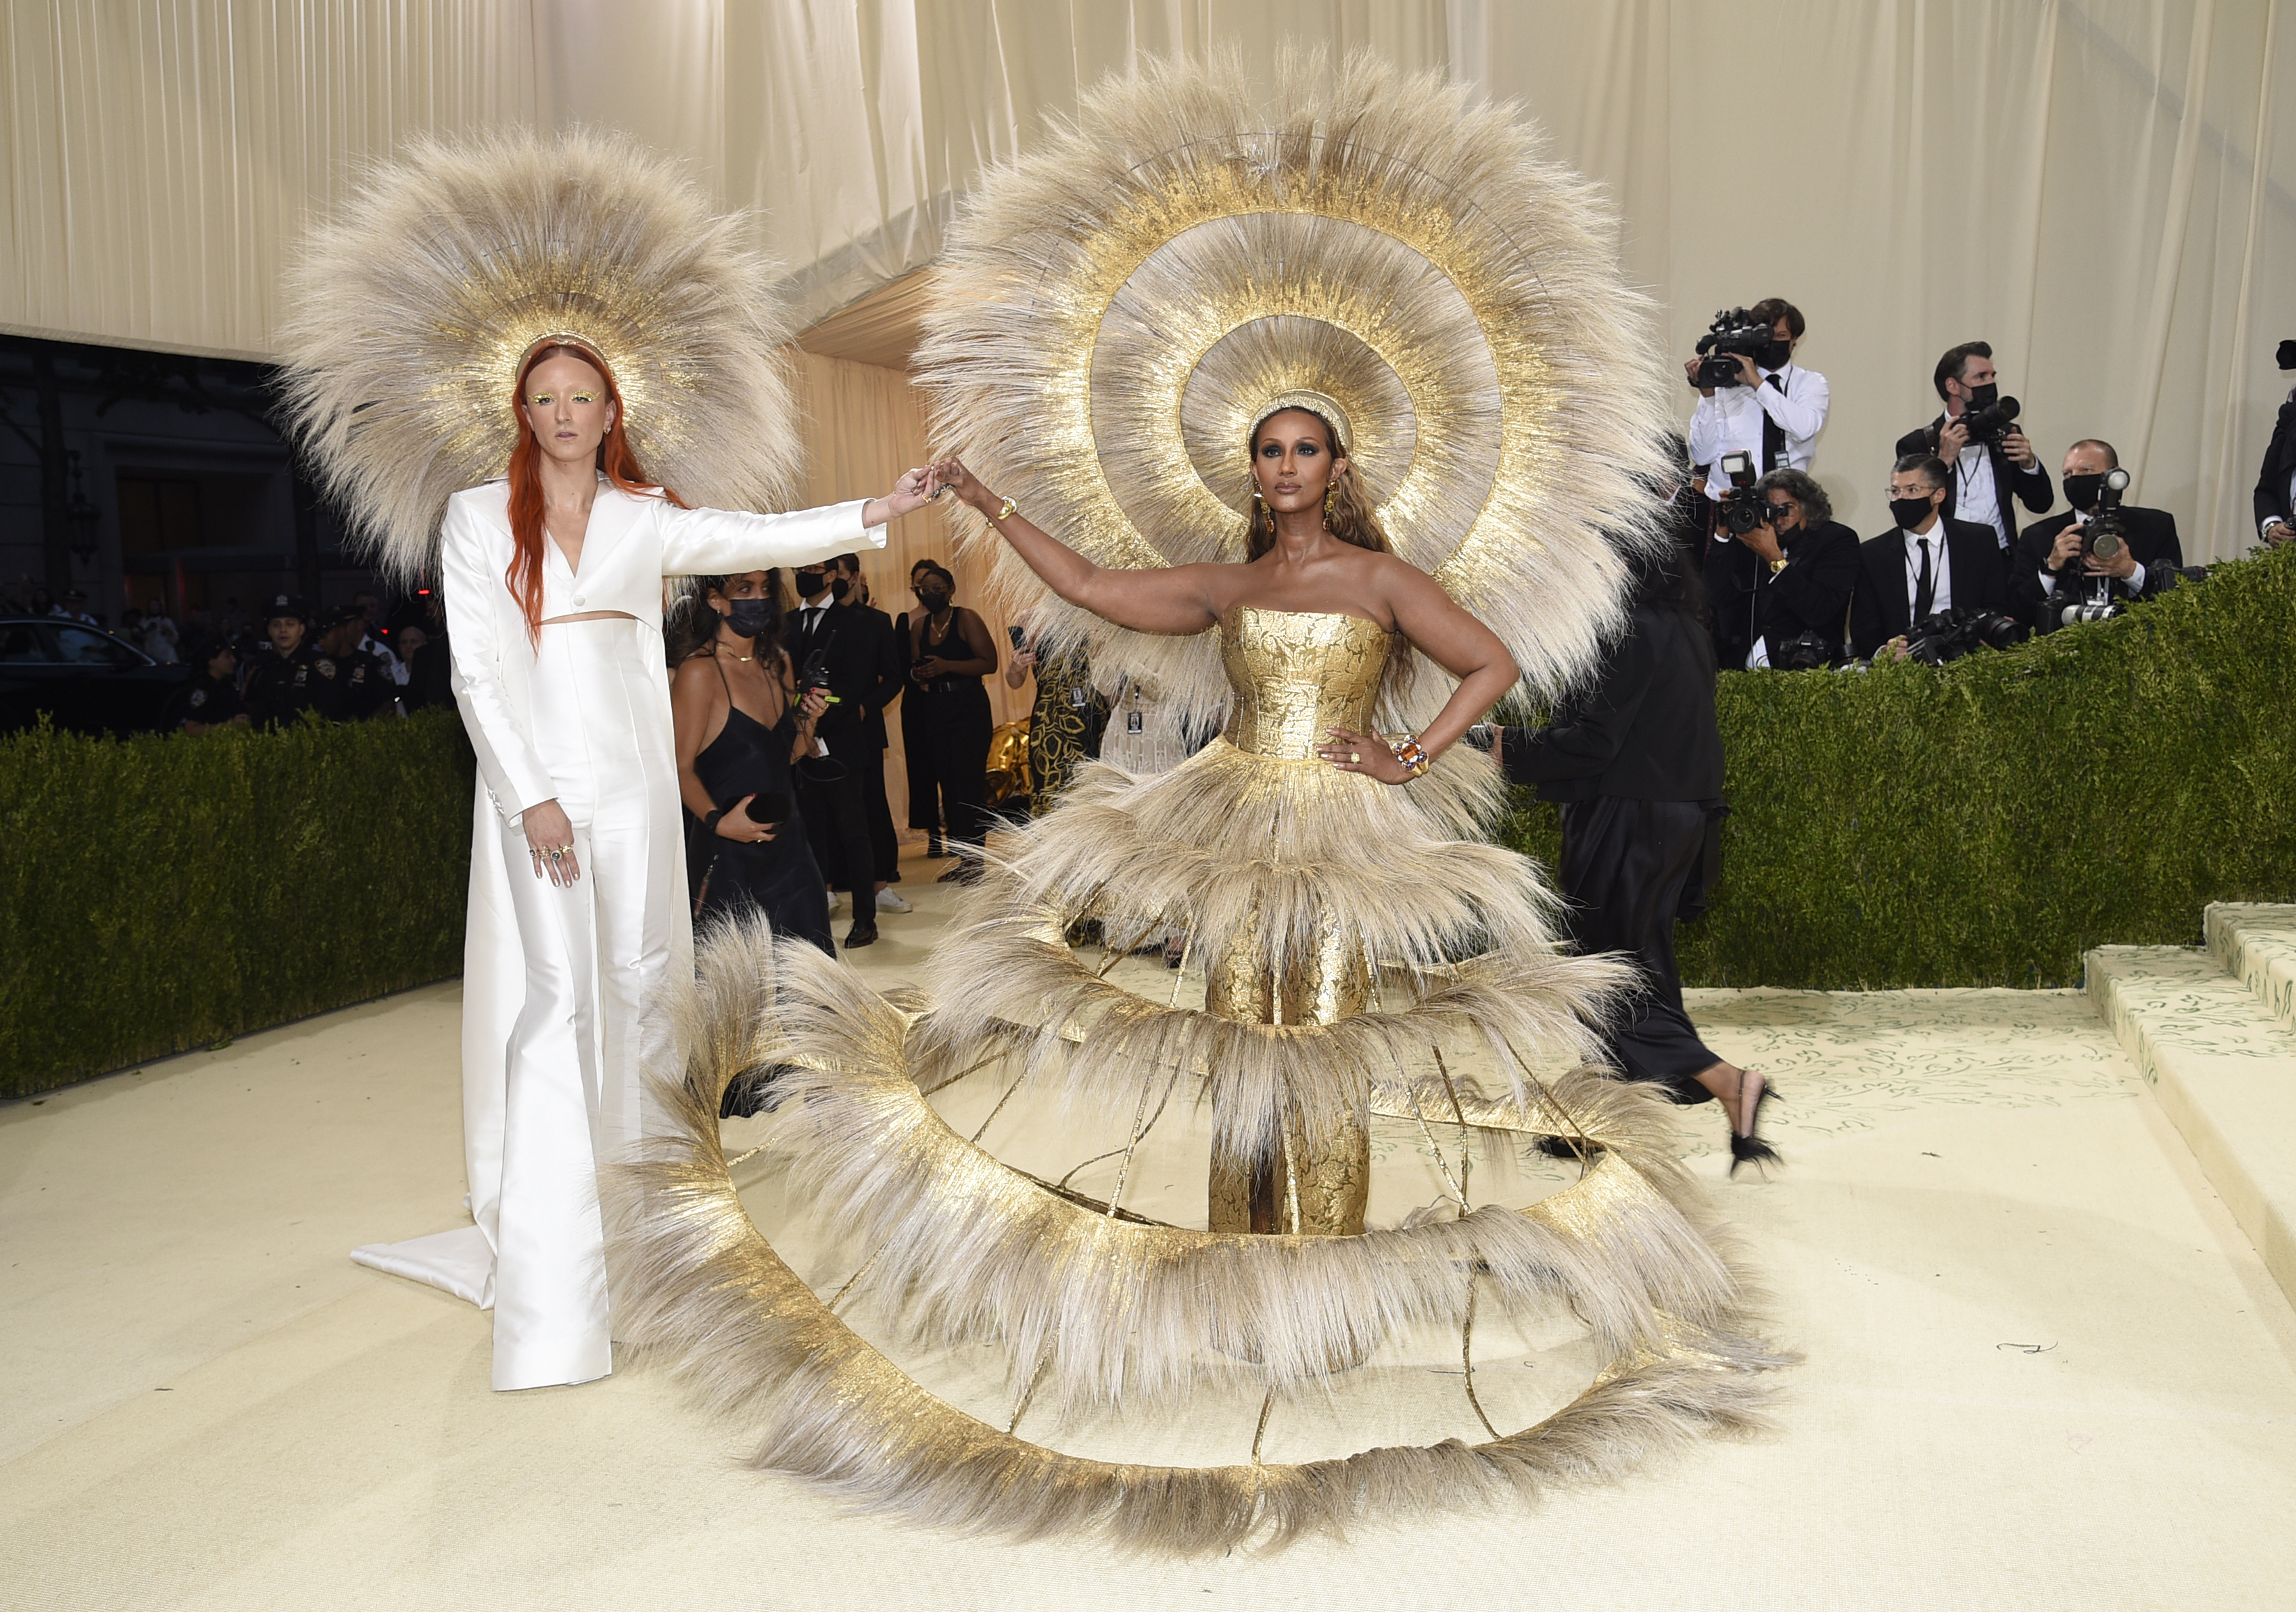 Met Gala 2021: The Best and Most Outrageous Looks – The Hollywood